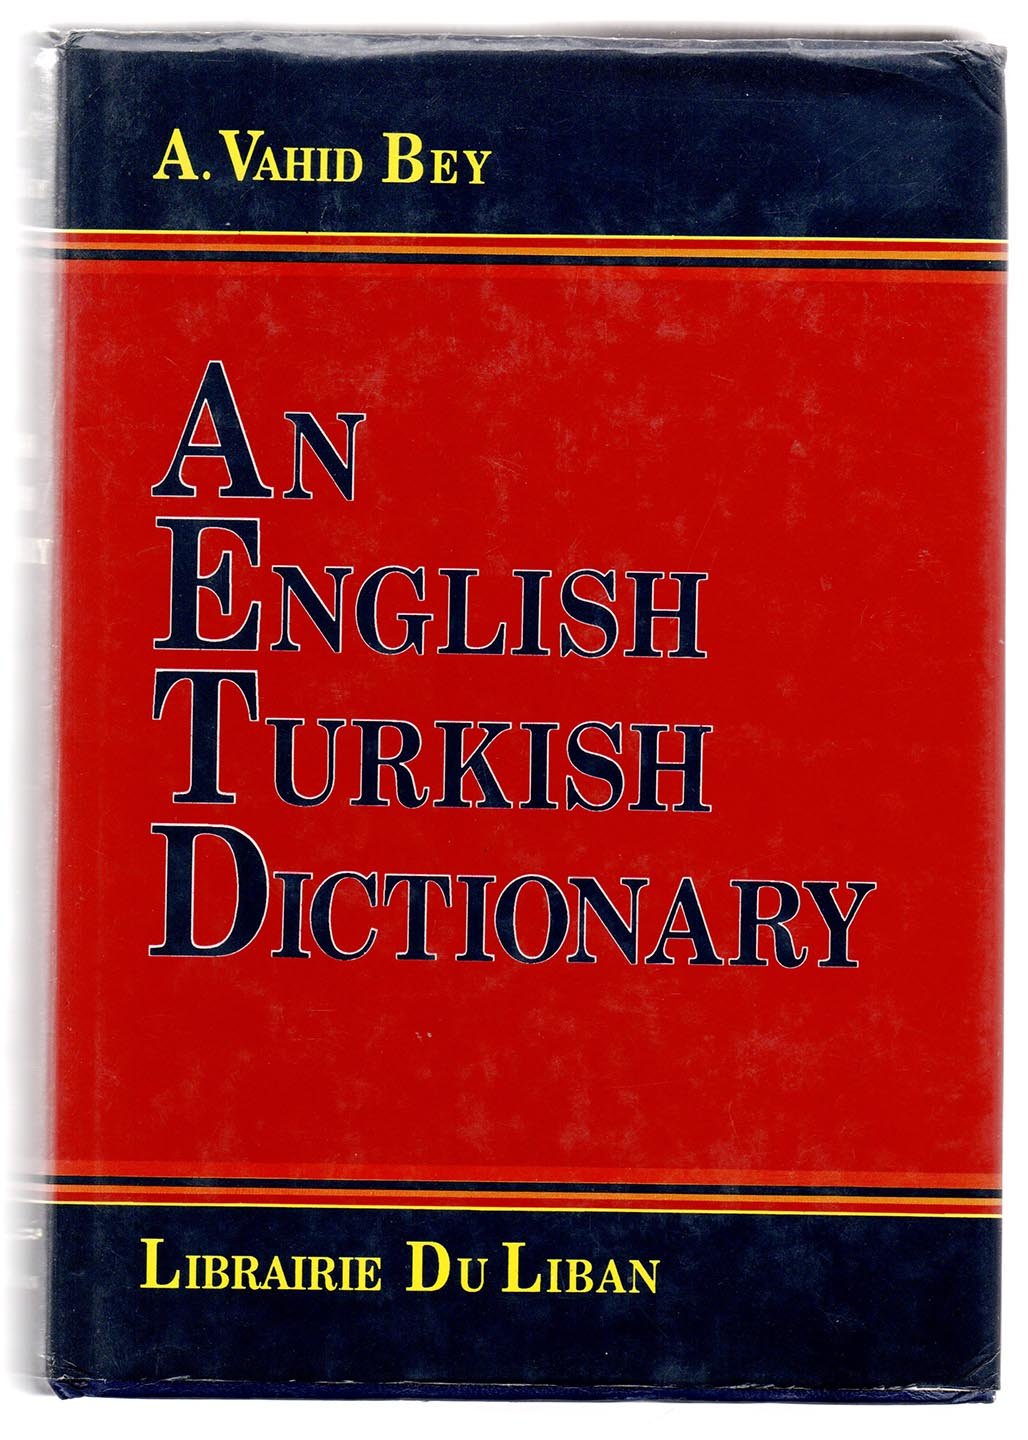 An English-Turkish Dictionary, Pronouncing and Explanatory, and Including Current Historical and Geograhical Names